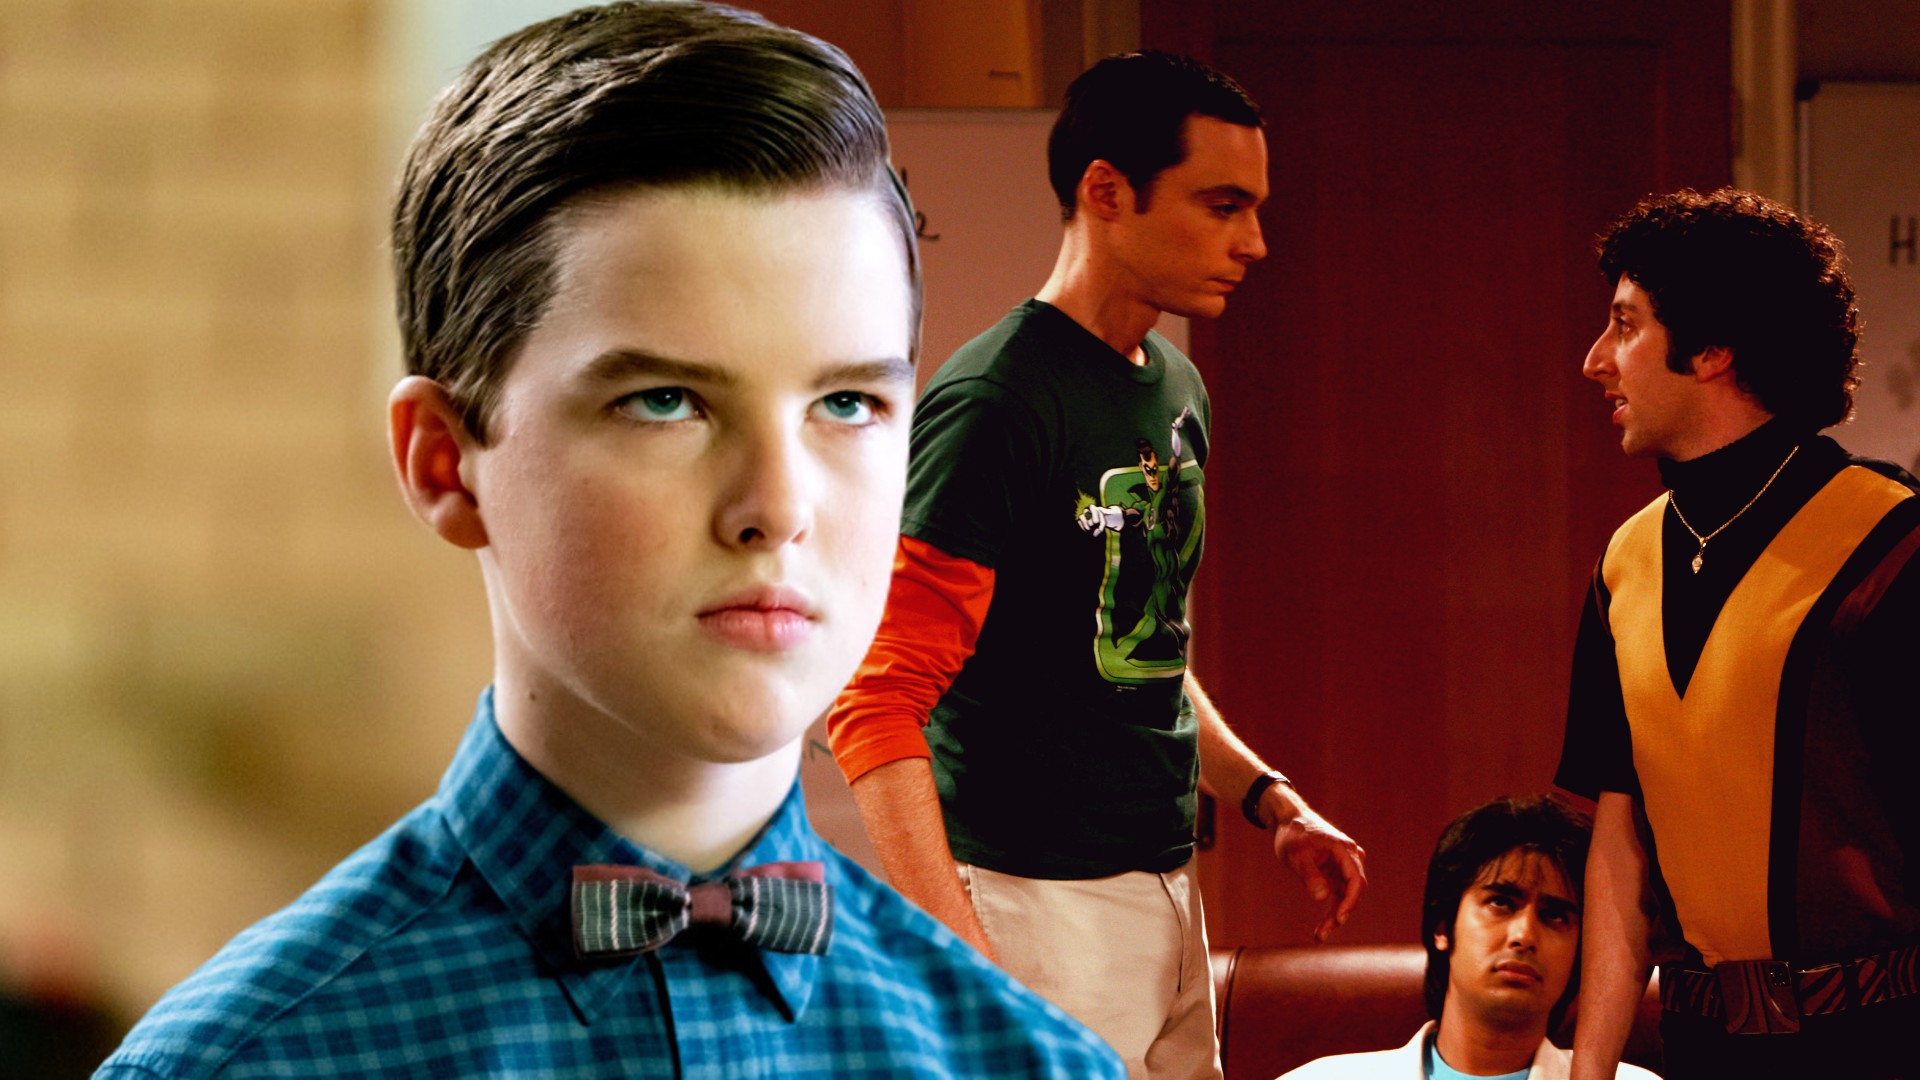 Young Sheldon Wouldn't Survive Past Season 1 Without Ditching TBBT Canon